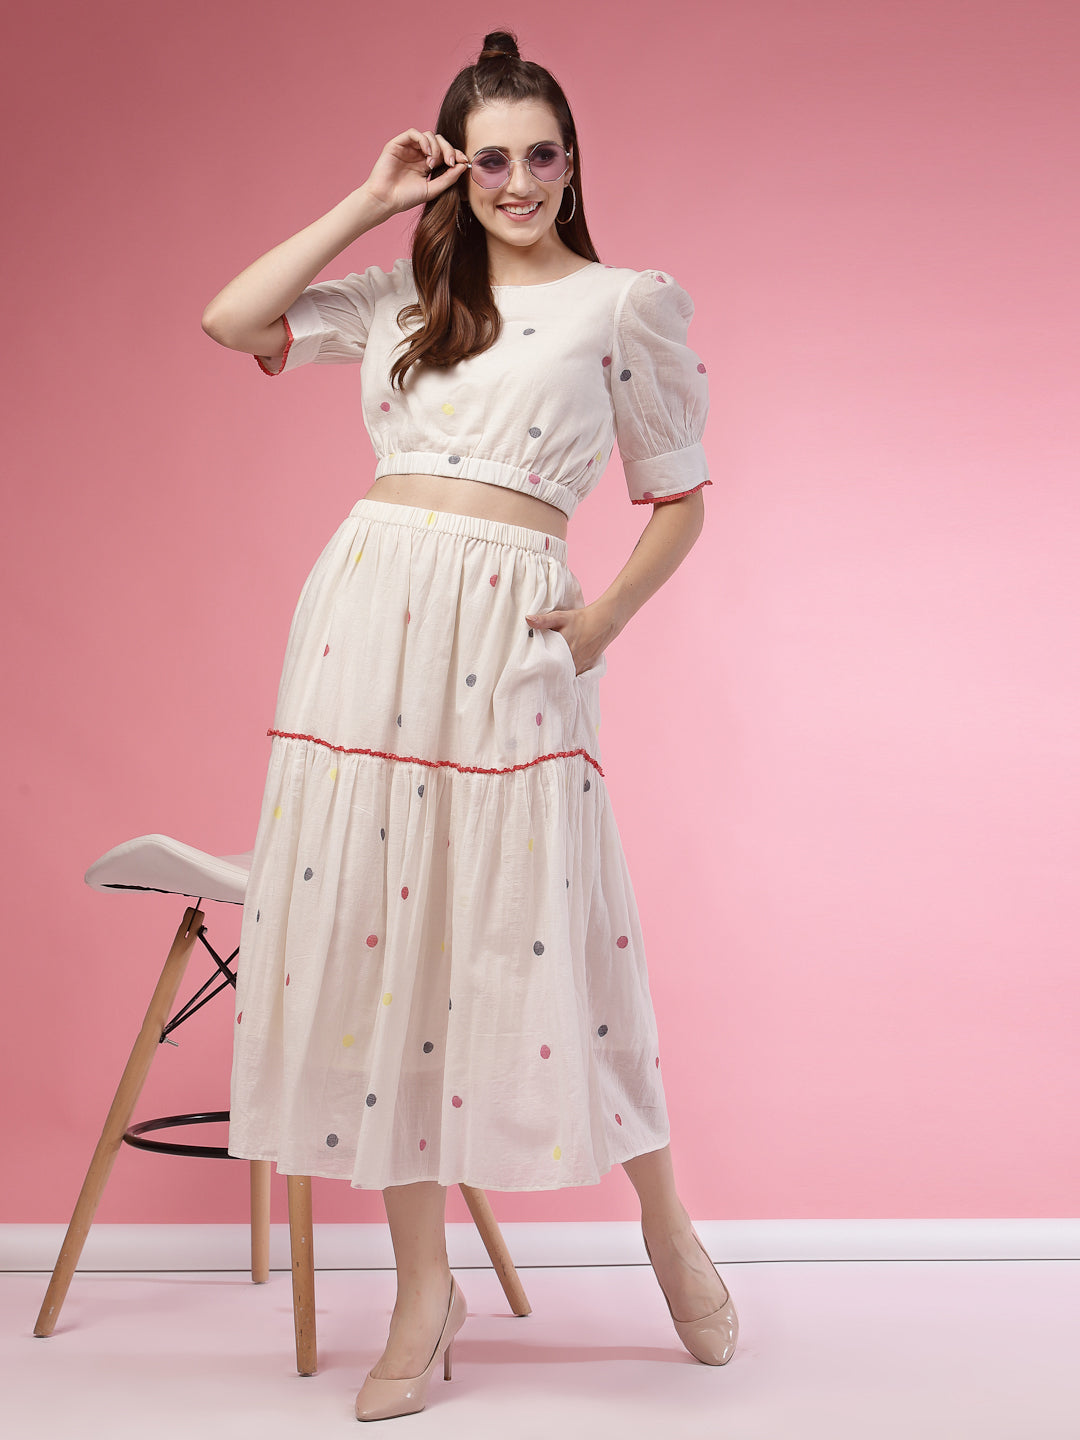 Terquois Polka Self-Design Casual Skirt-Top with Gathers and Ruffles Coordinate Sets TERQUOIS   